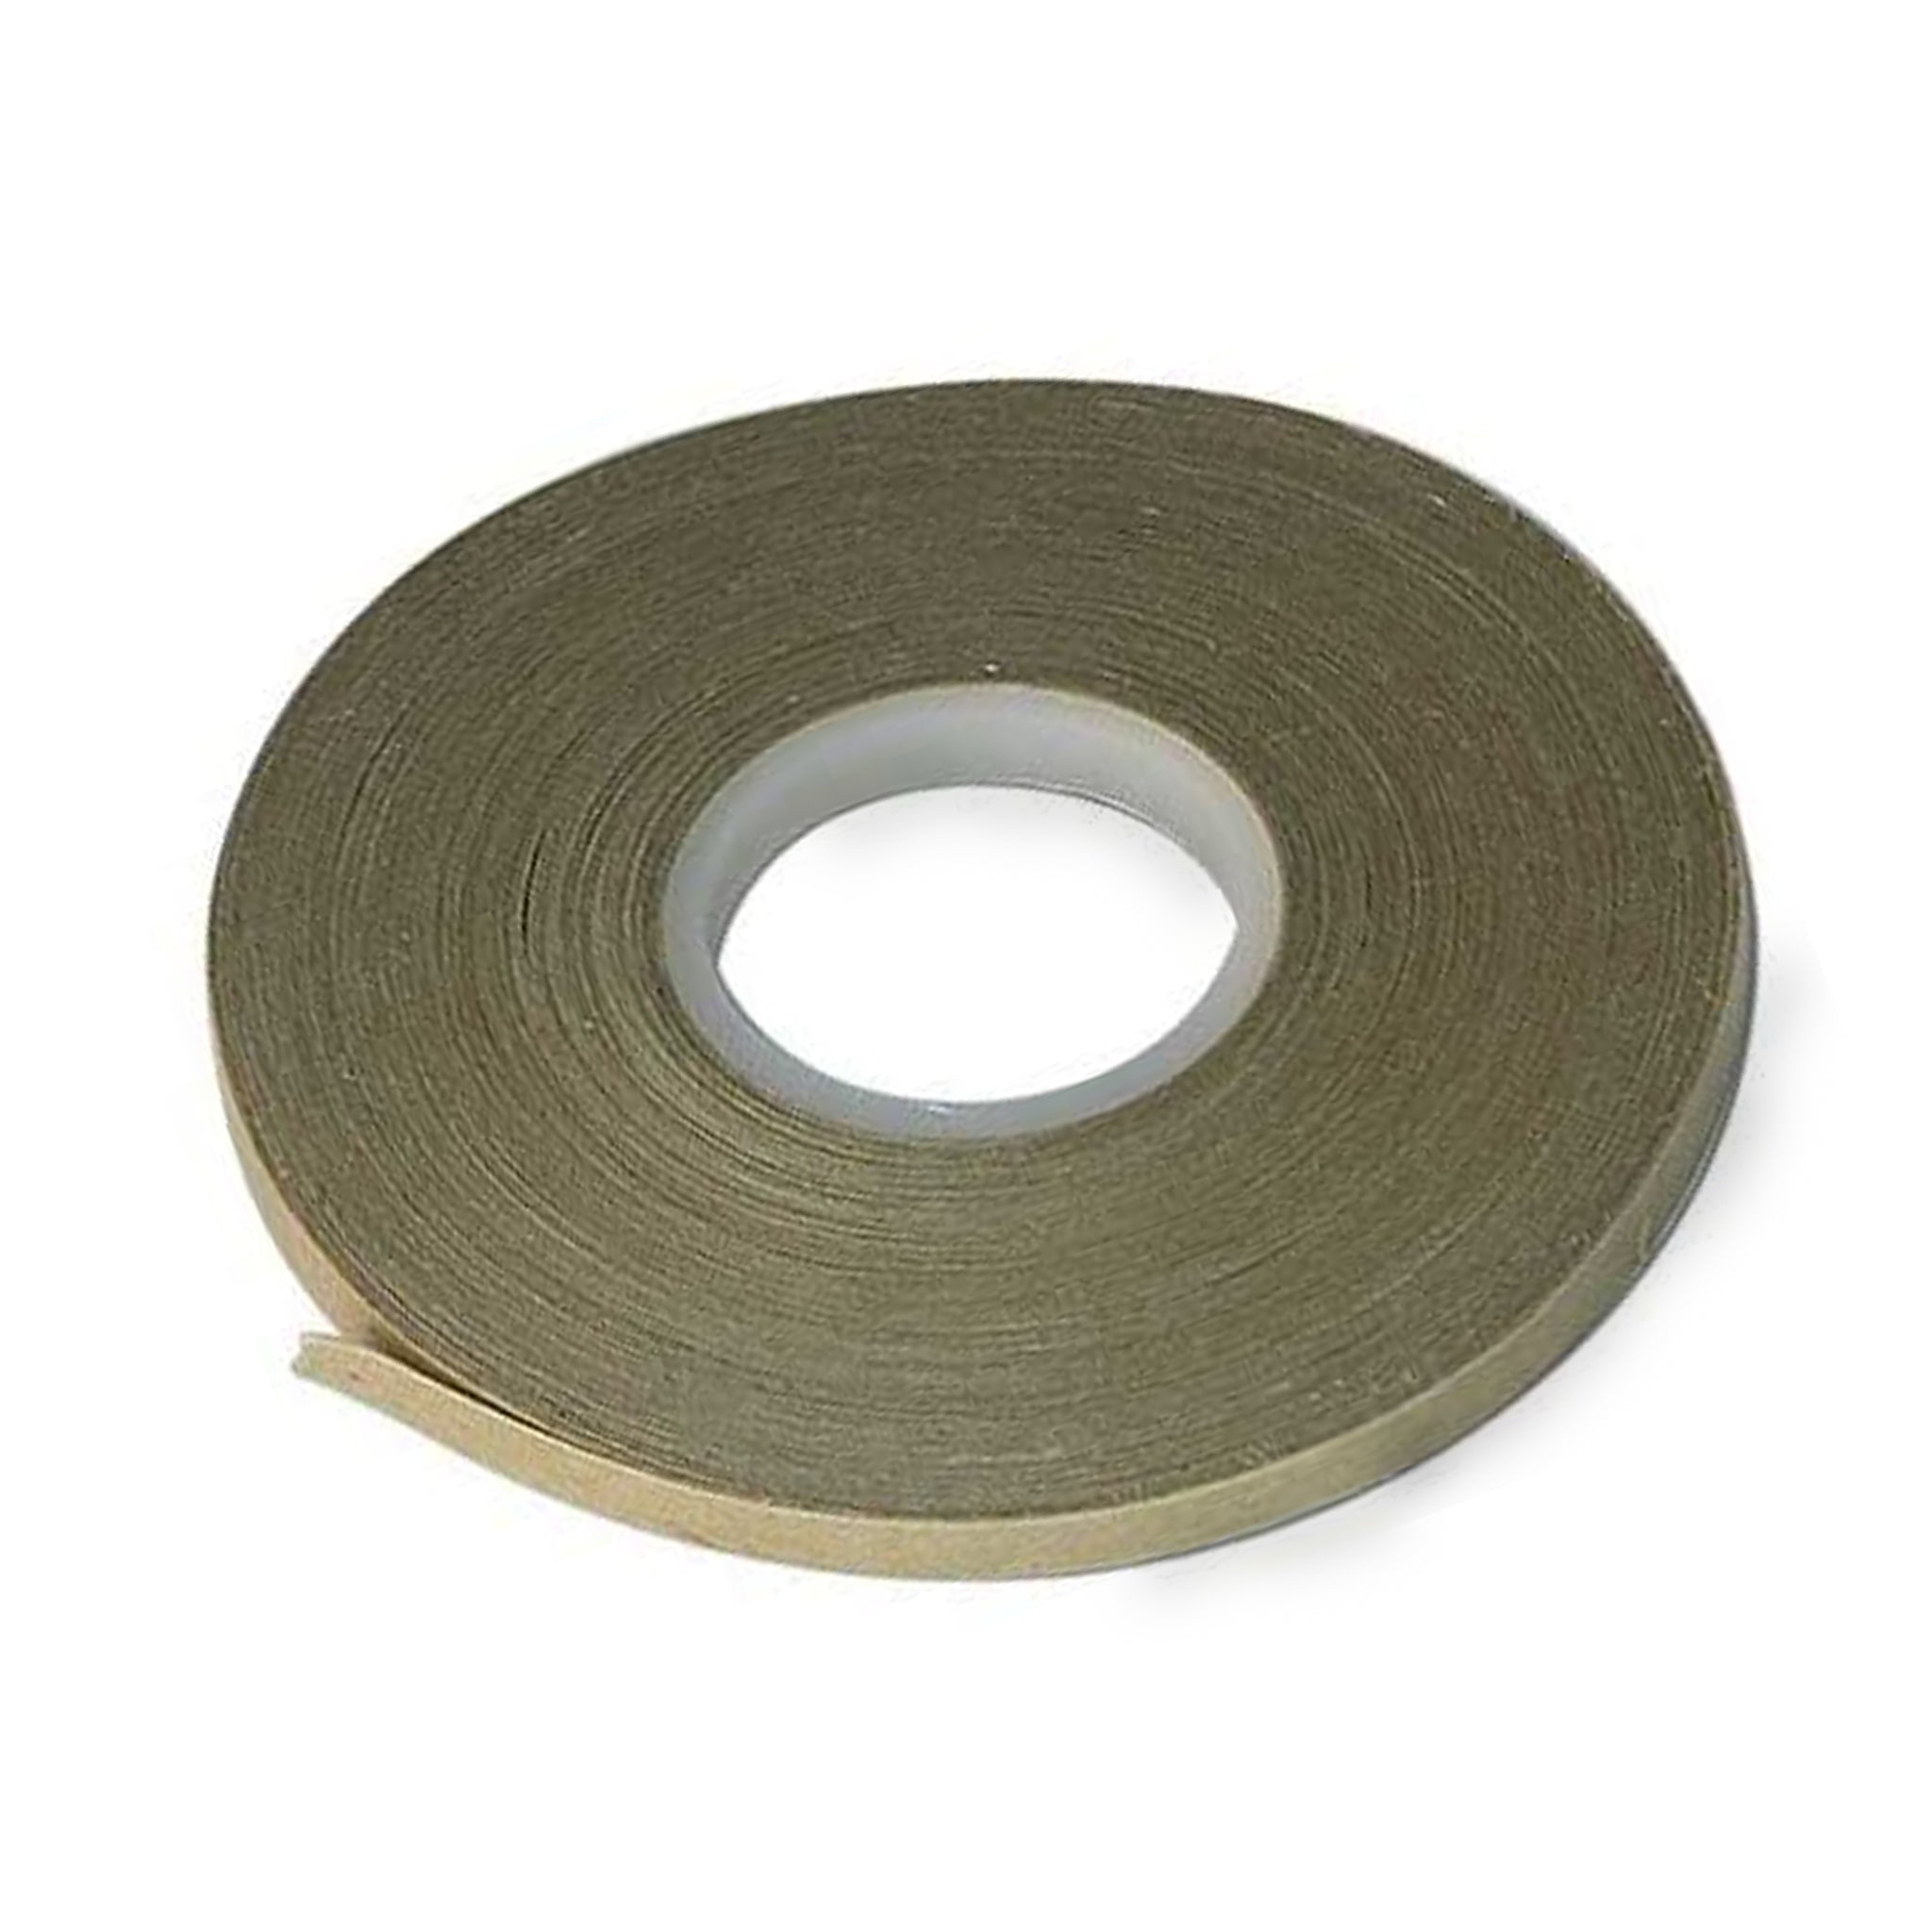 5mm  Tanner's Bond Adhesive Tape - Repositionable from Identity Leathercraft